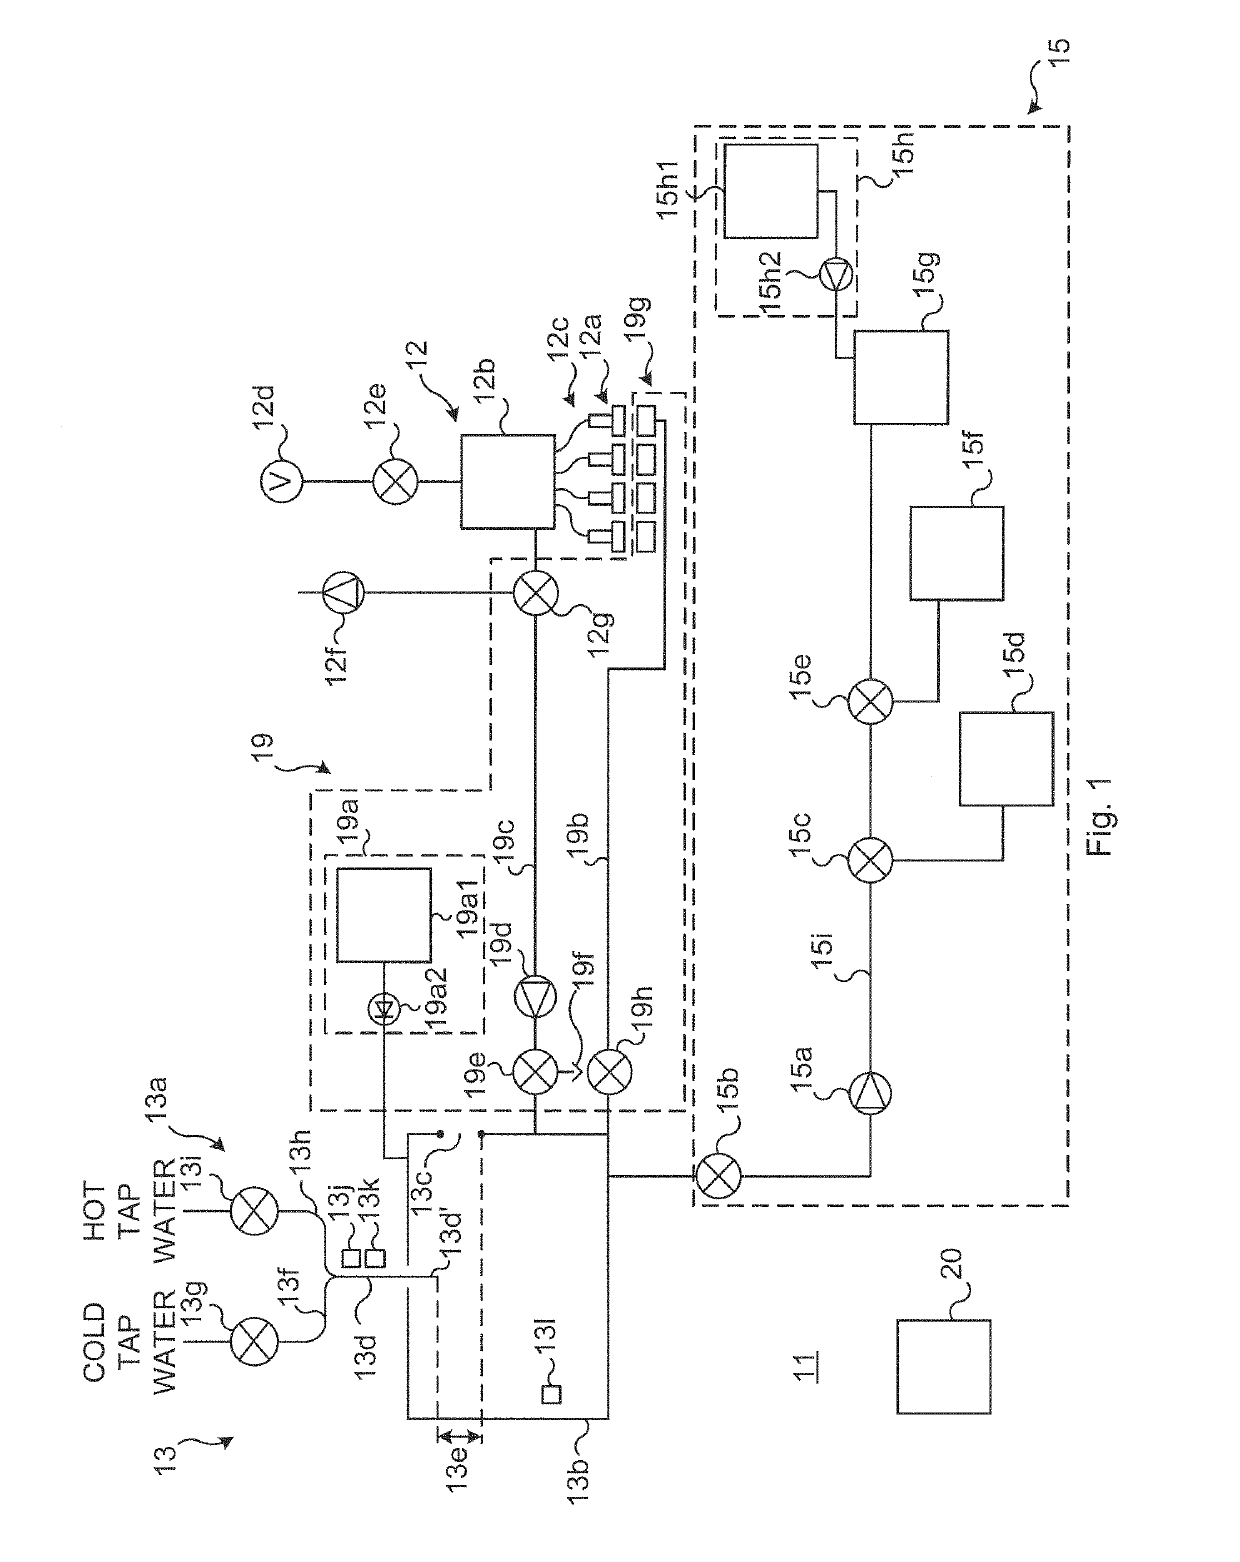 Cleaning system and method for an automatic milking system